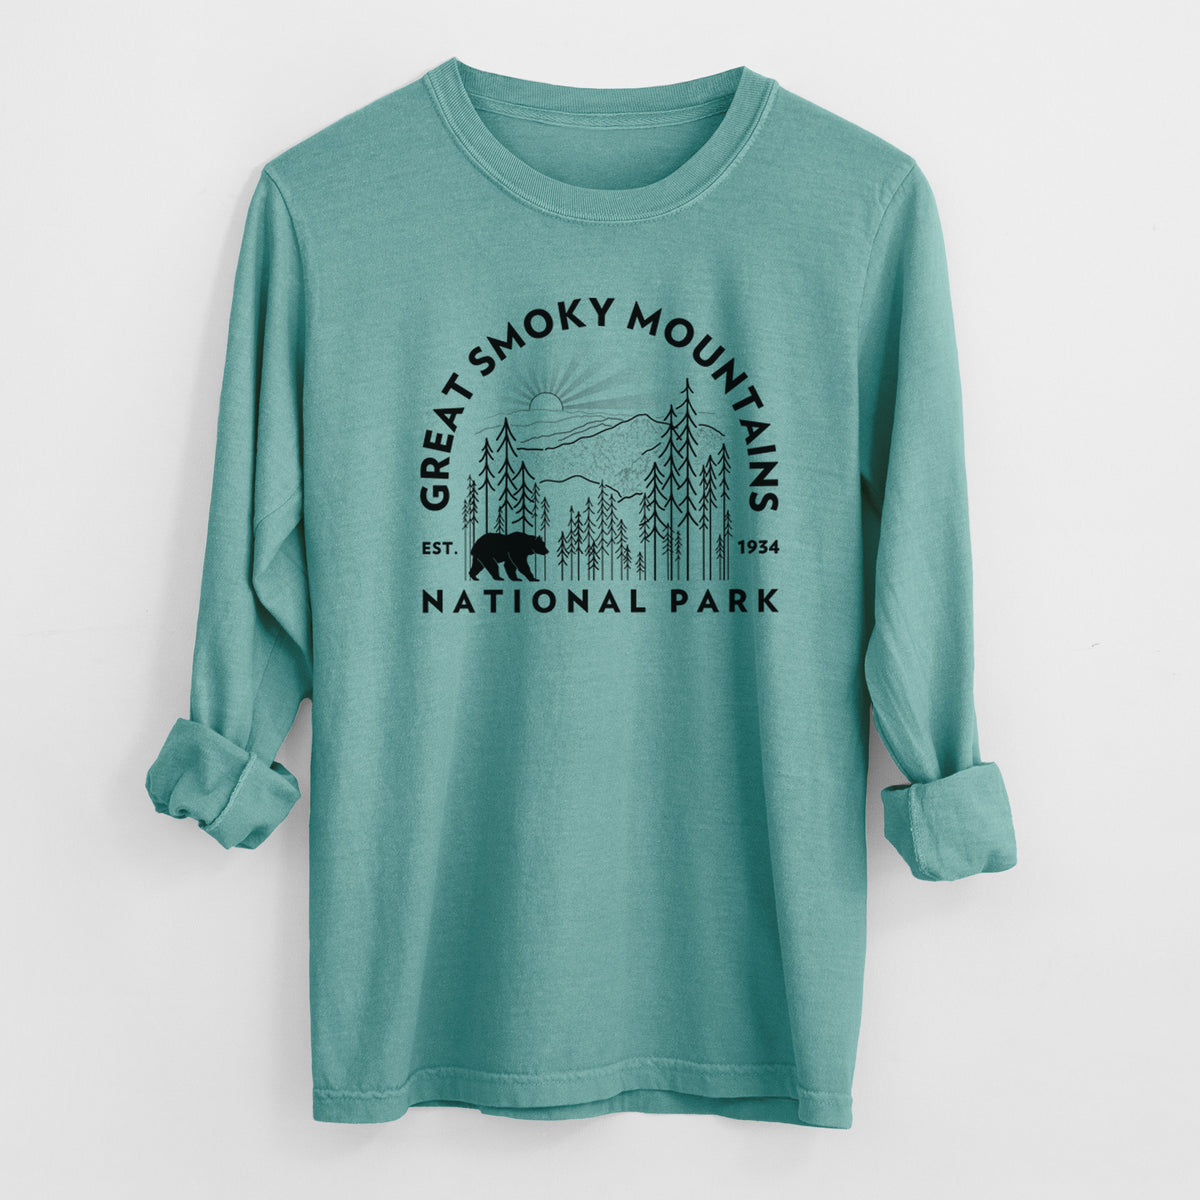 Great Smoky Mountains National Park - Heavyweight 100% Cotton Long Sleeve